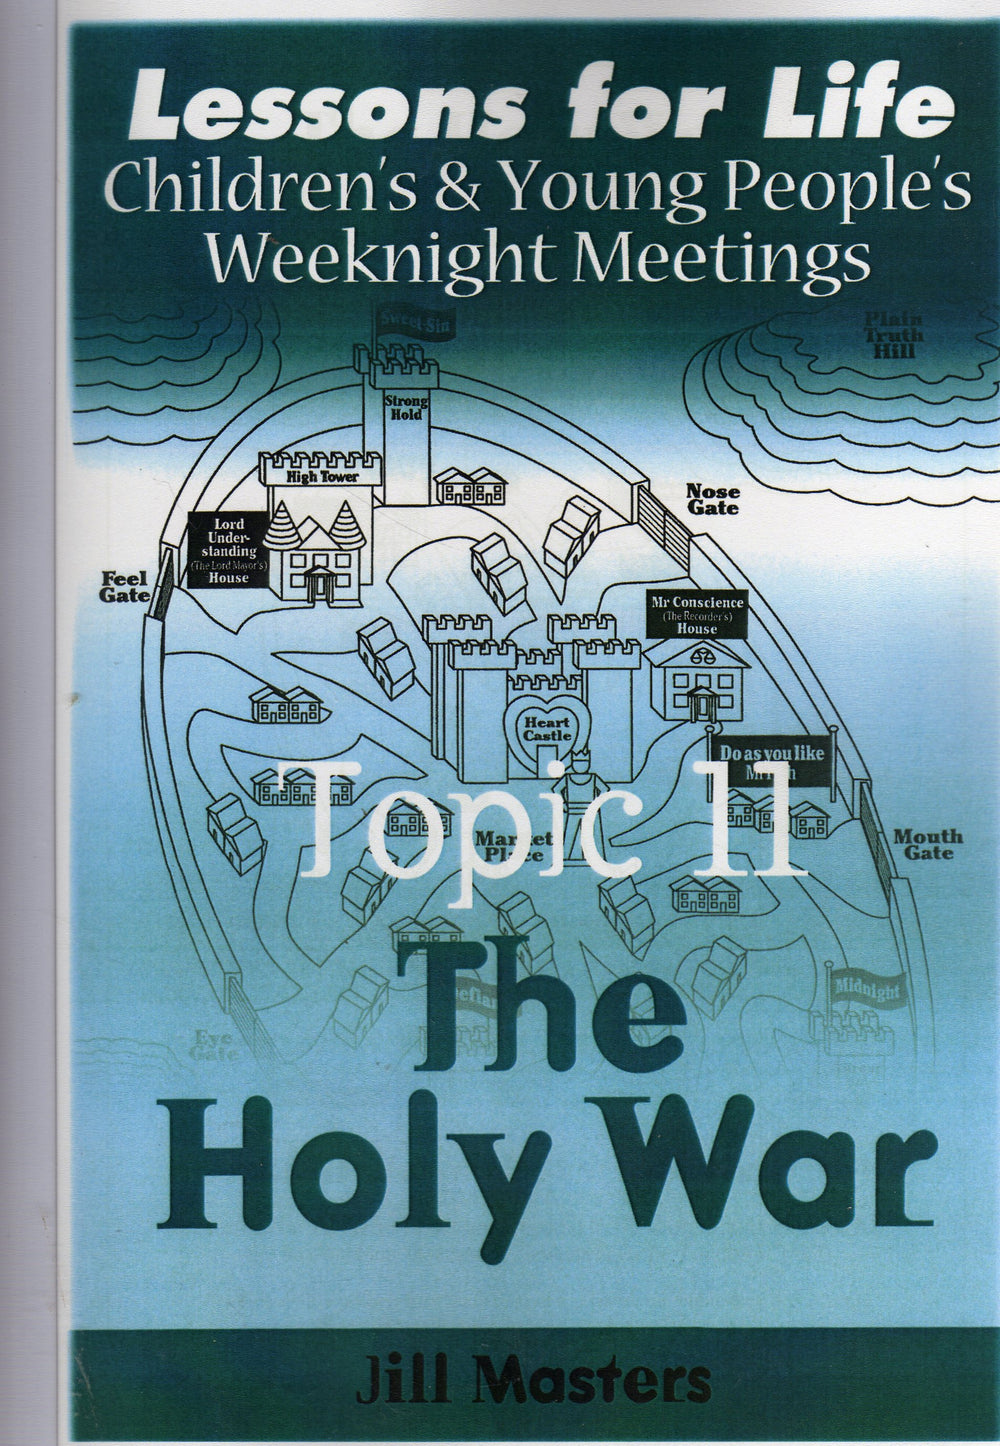 Topic 11 - The Holy War